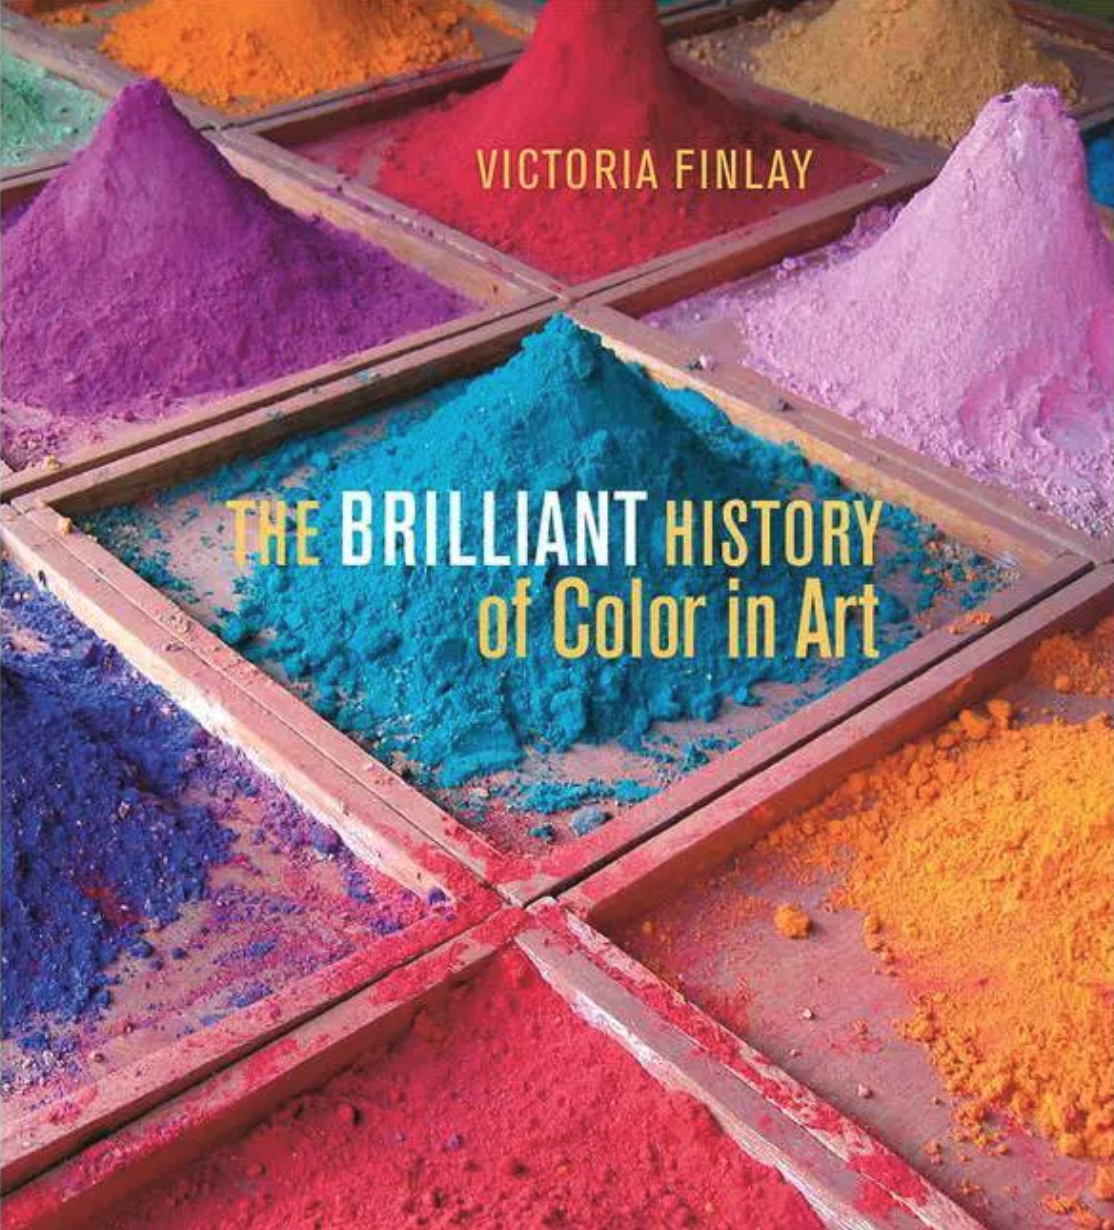 The Brilliant History of Color in Art by Victoria Finlay book cover